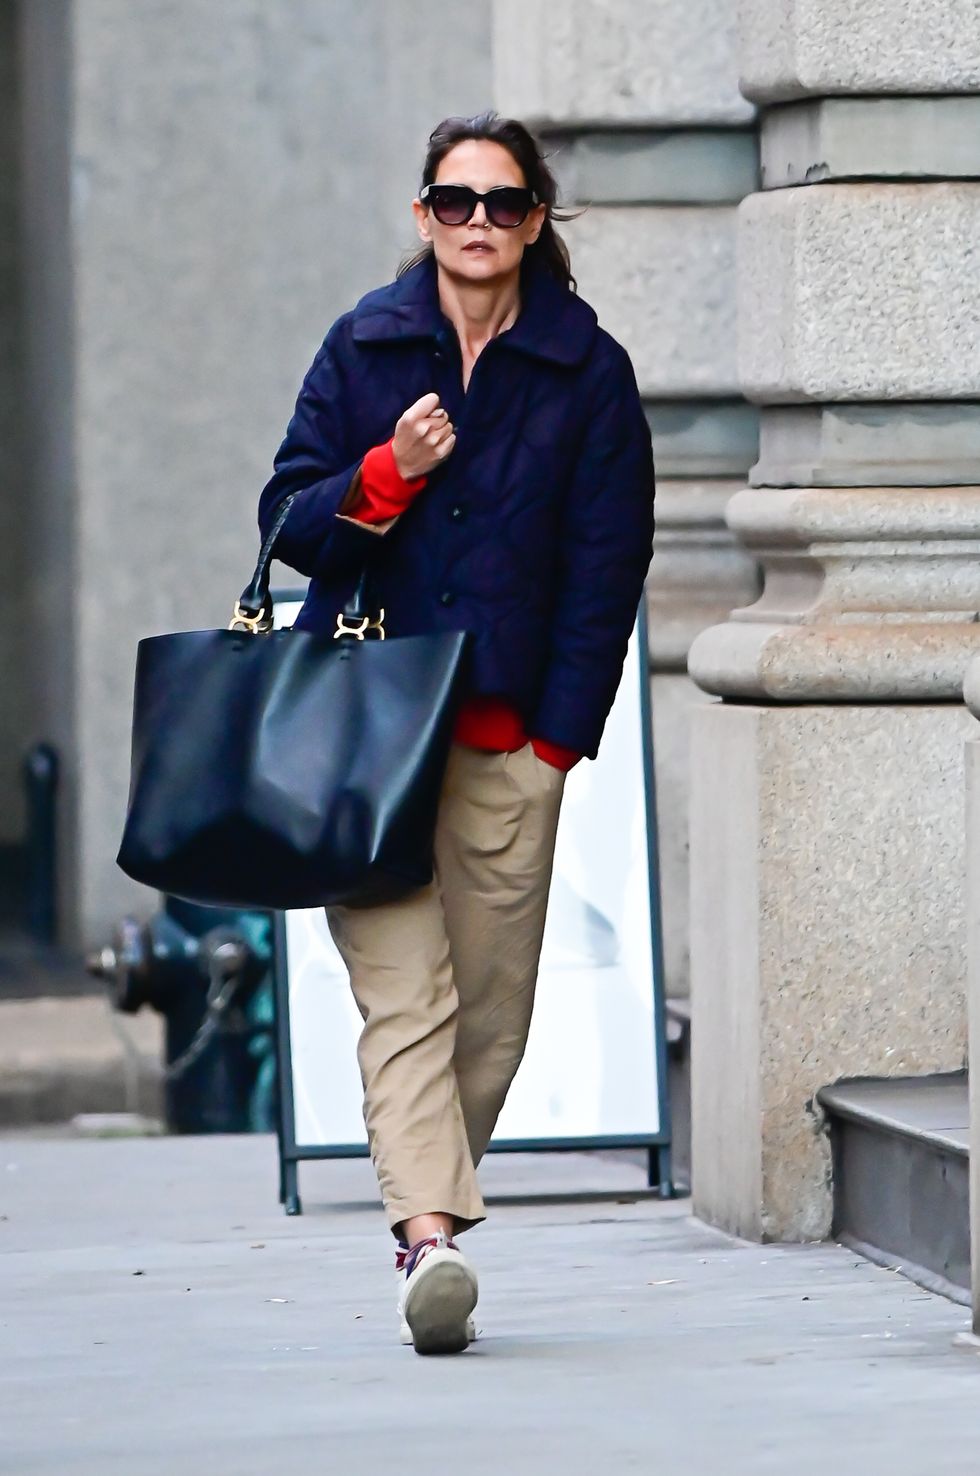 Katie Holmes Was the First Celeb to Rock This Designer's Colorful Bags